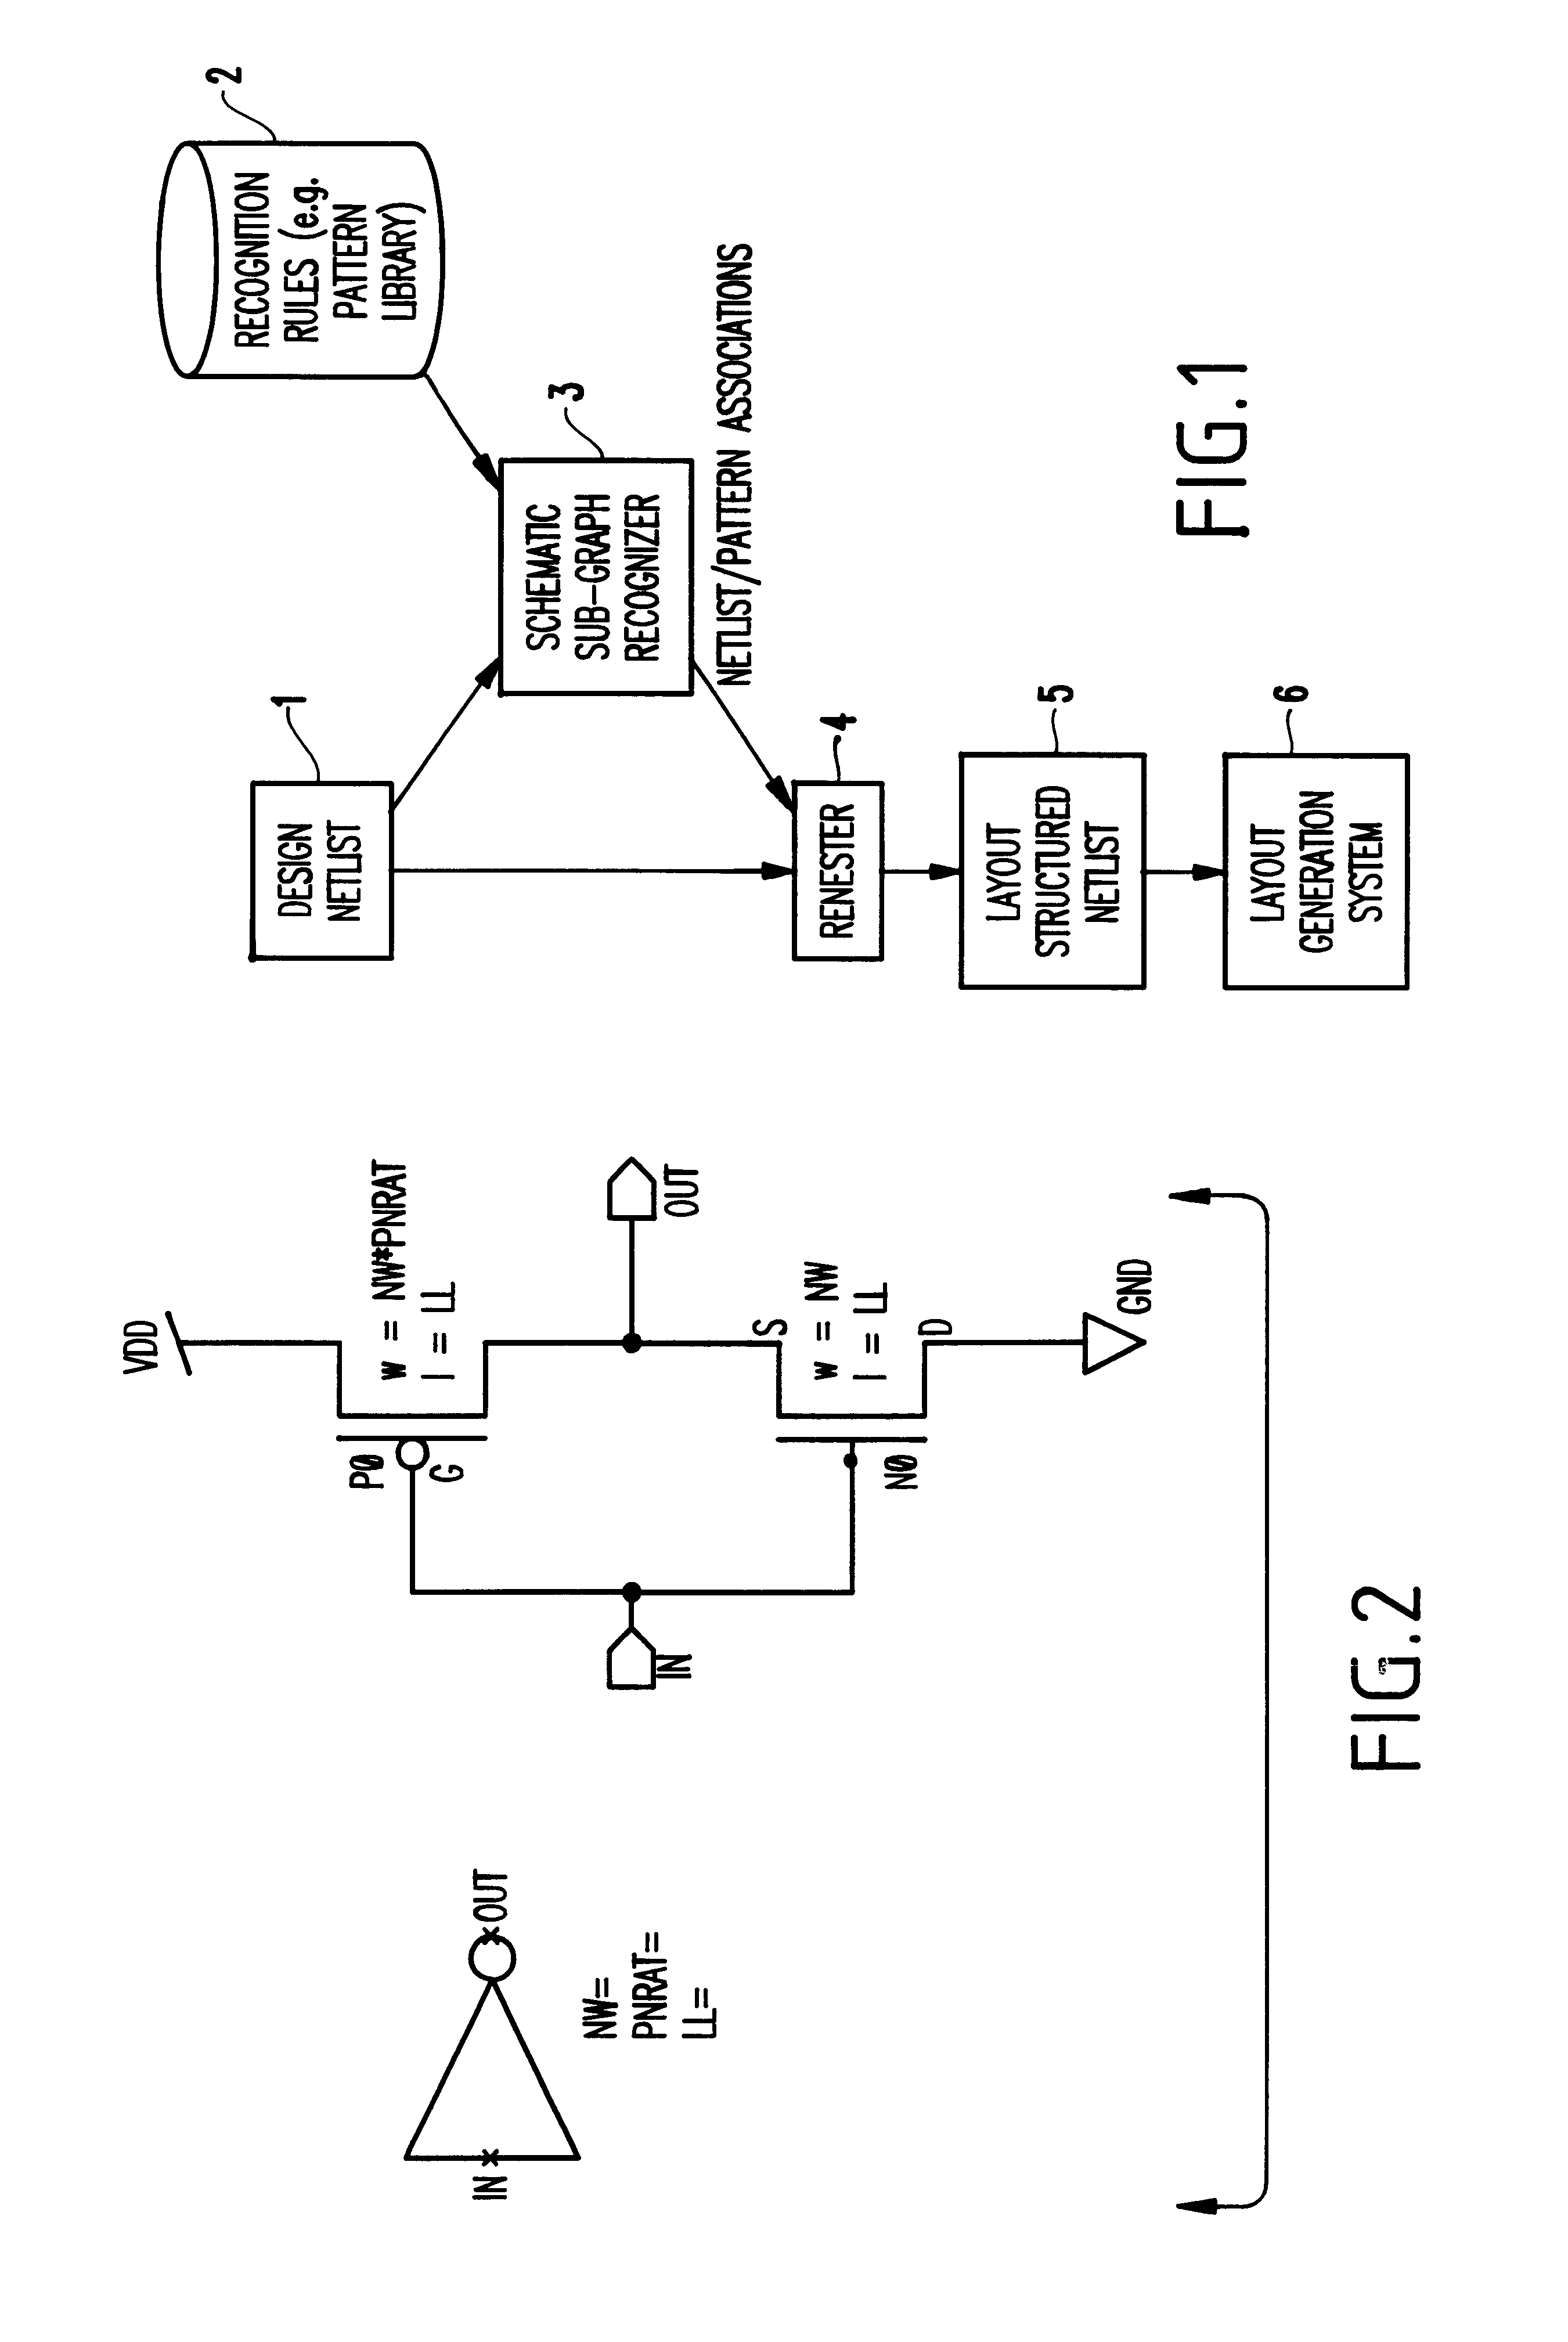 Hierarchical layout method for integrated circuits